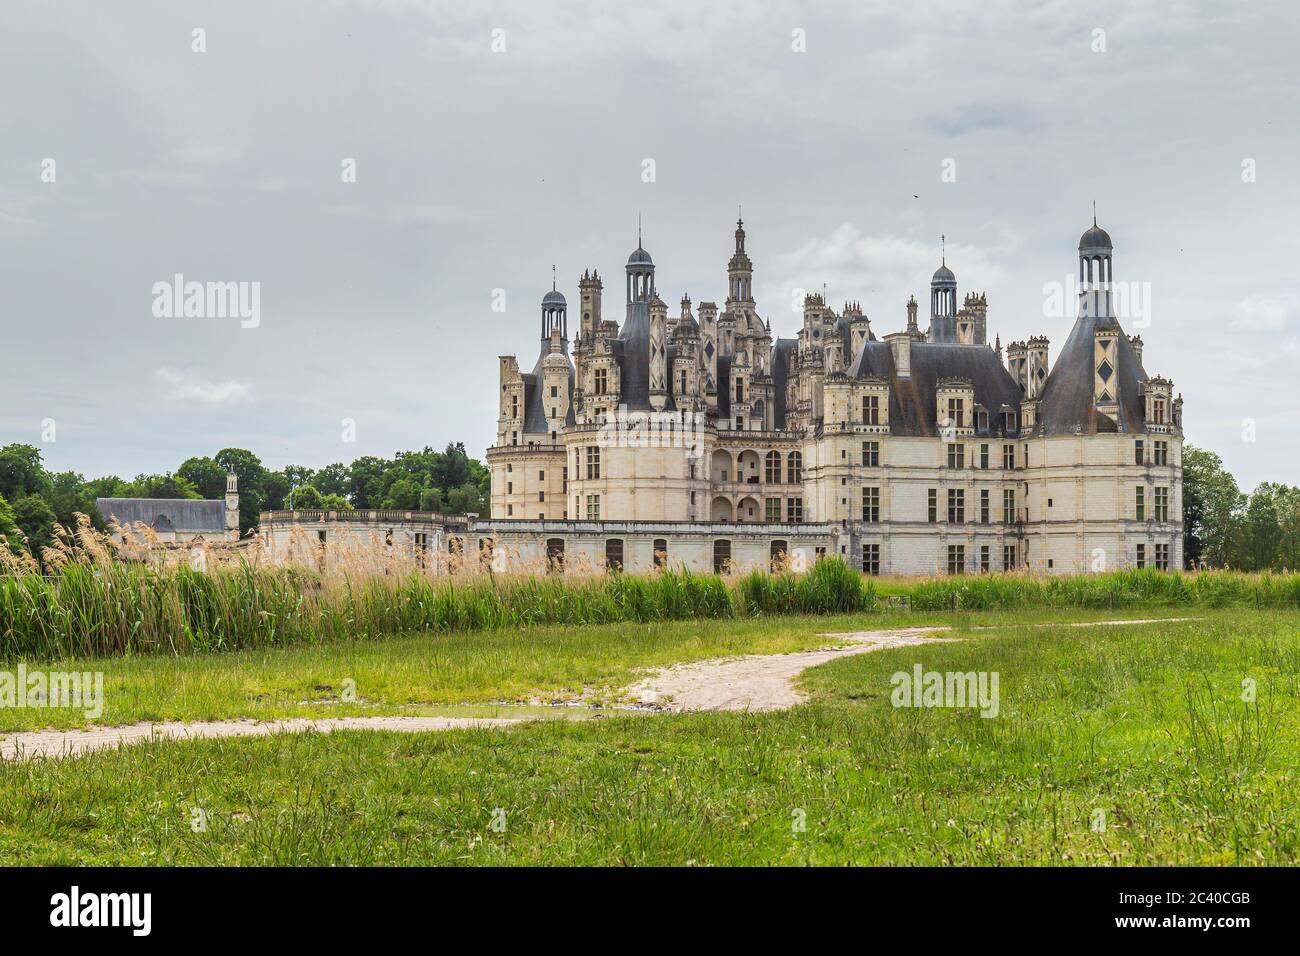 Dark clouds and dramatic scene over Chateau Chambord . Castle with very distinctive French Renaissance architecture Stock Photo